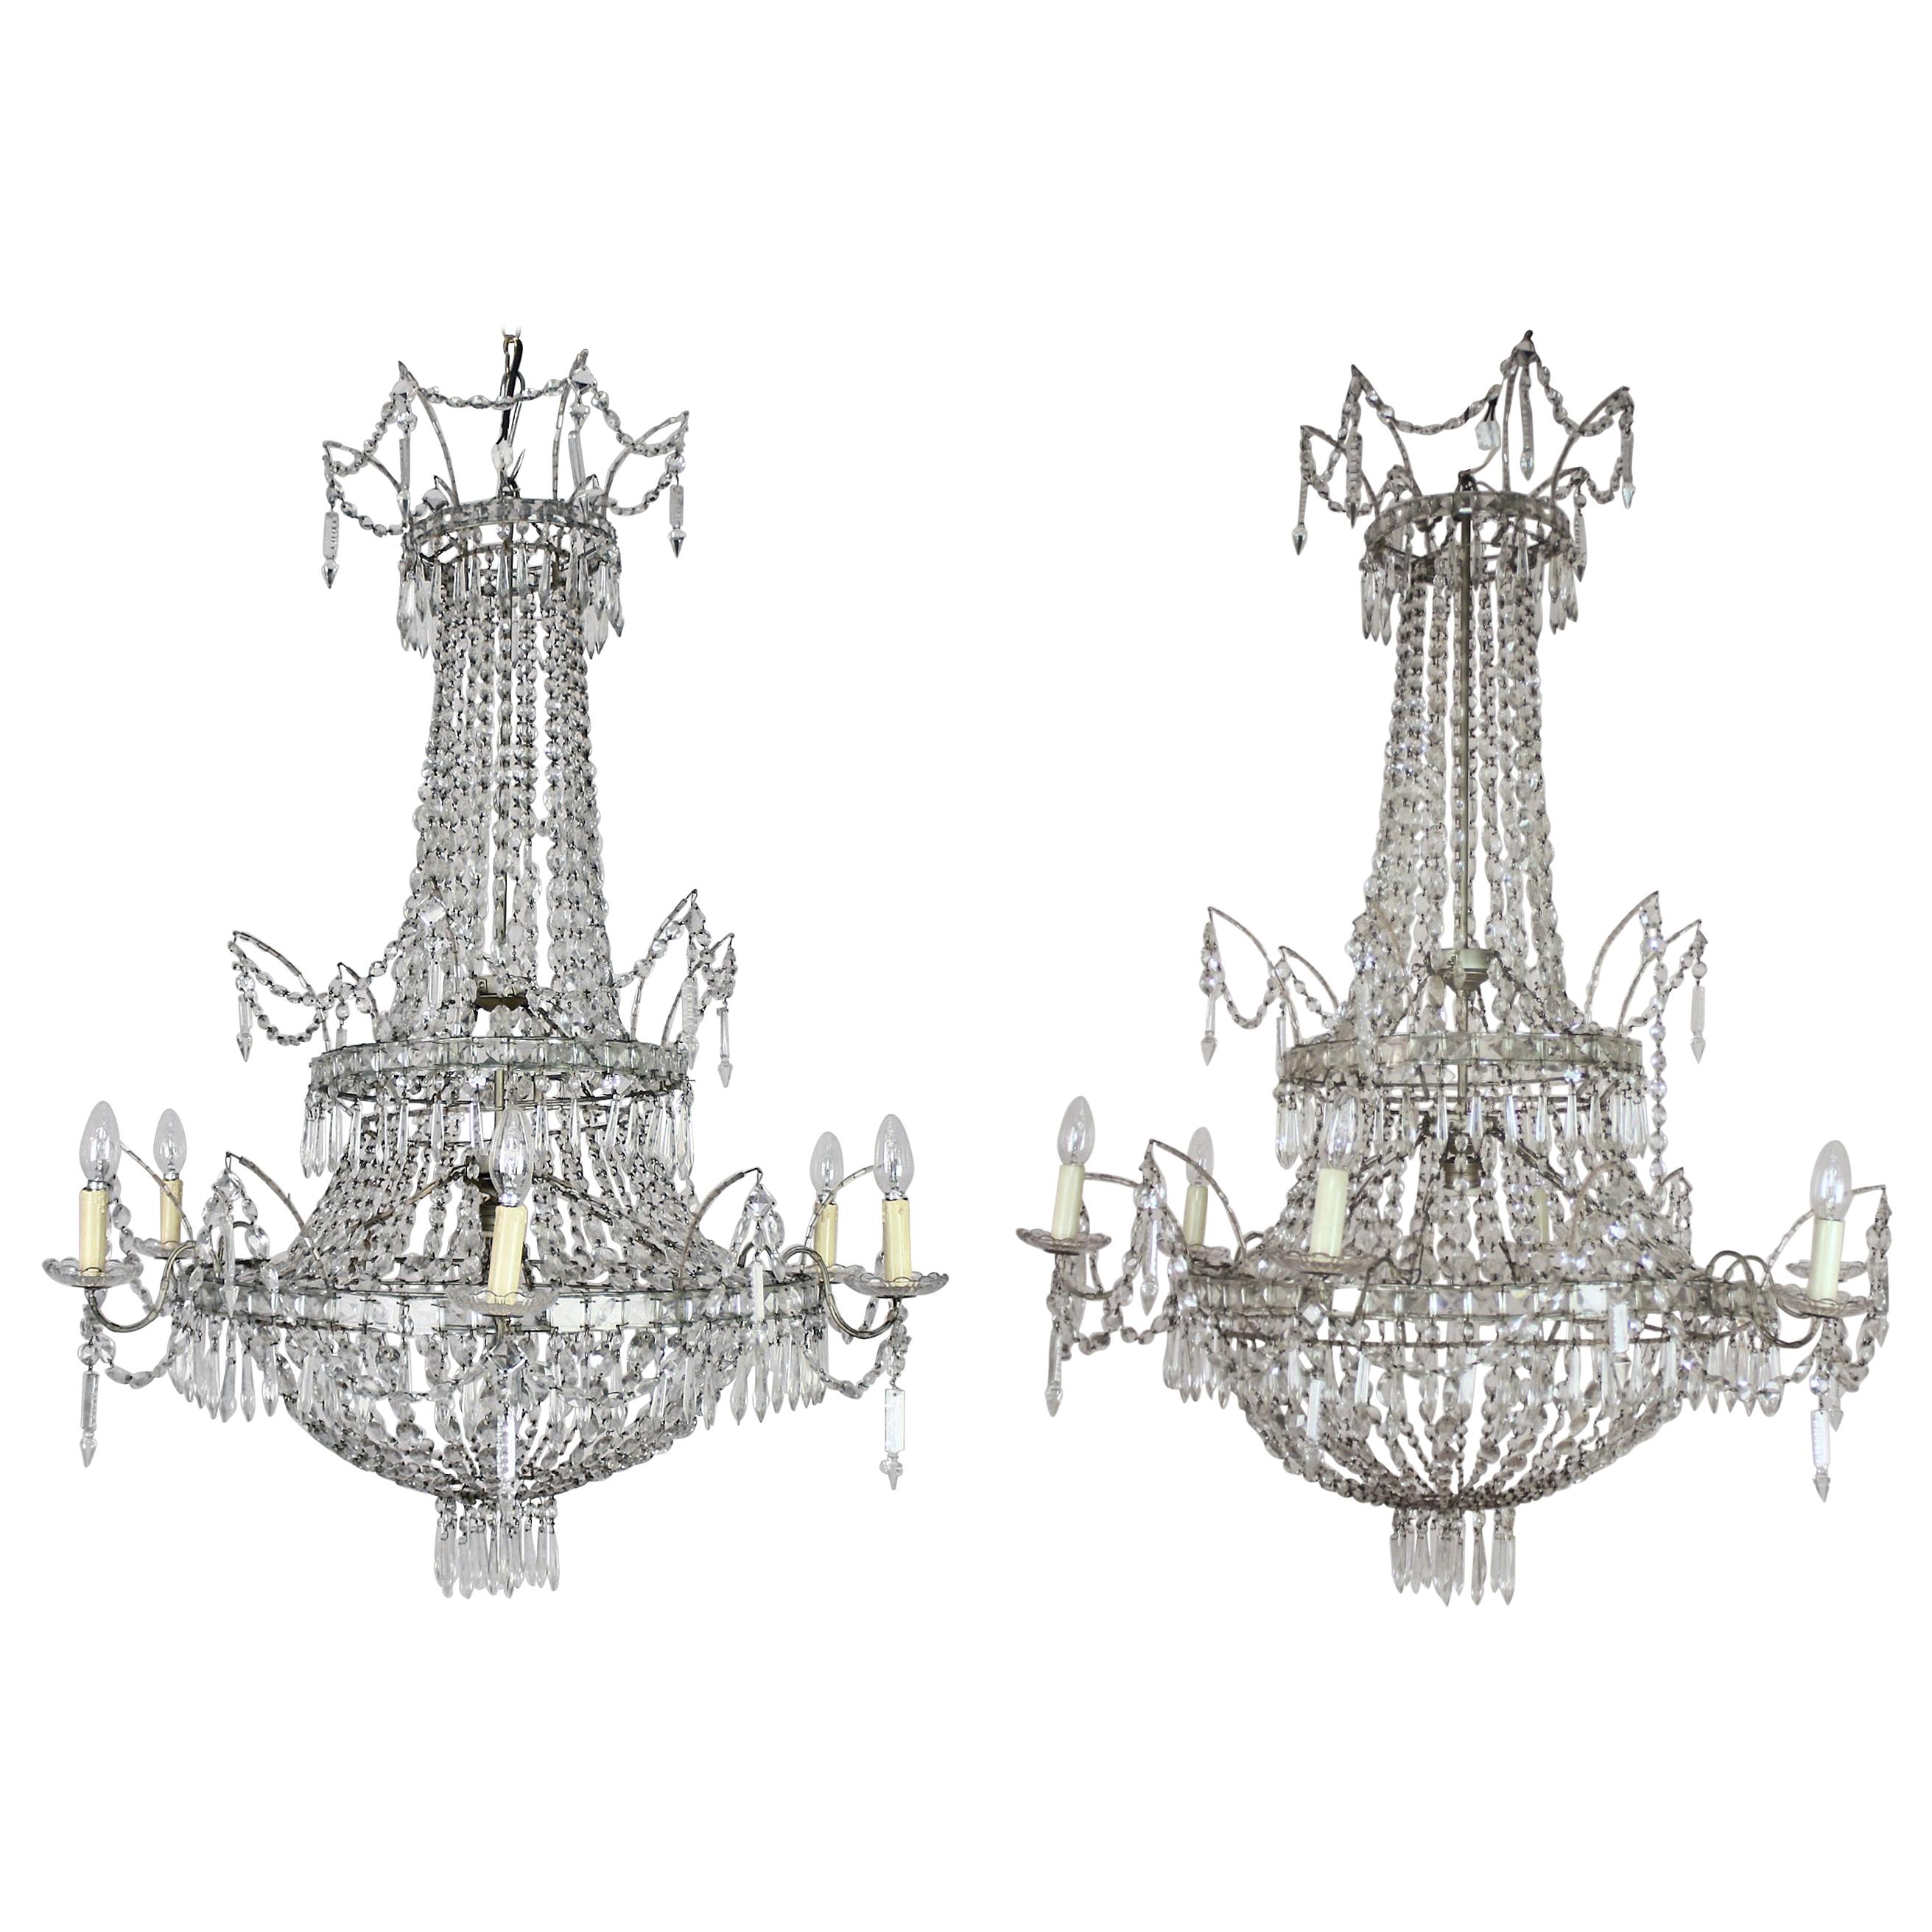 Large Pair of Spanish Empire Style 7-Light Crystal-Cut Chandeliers